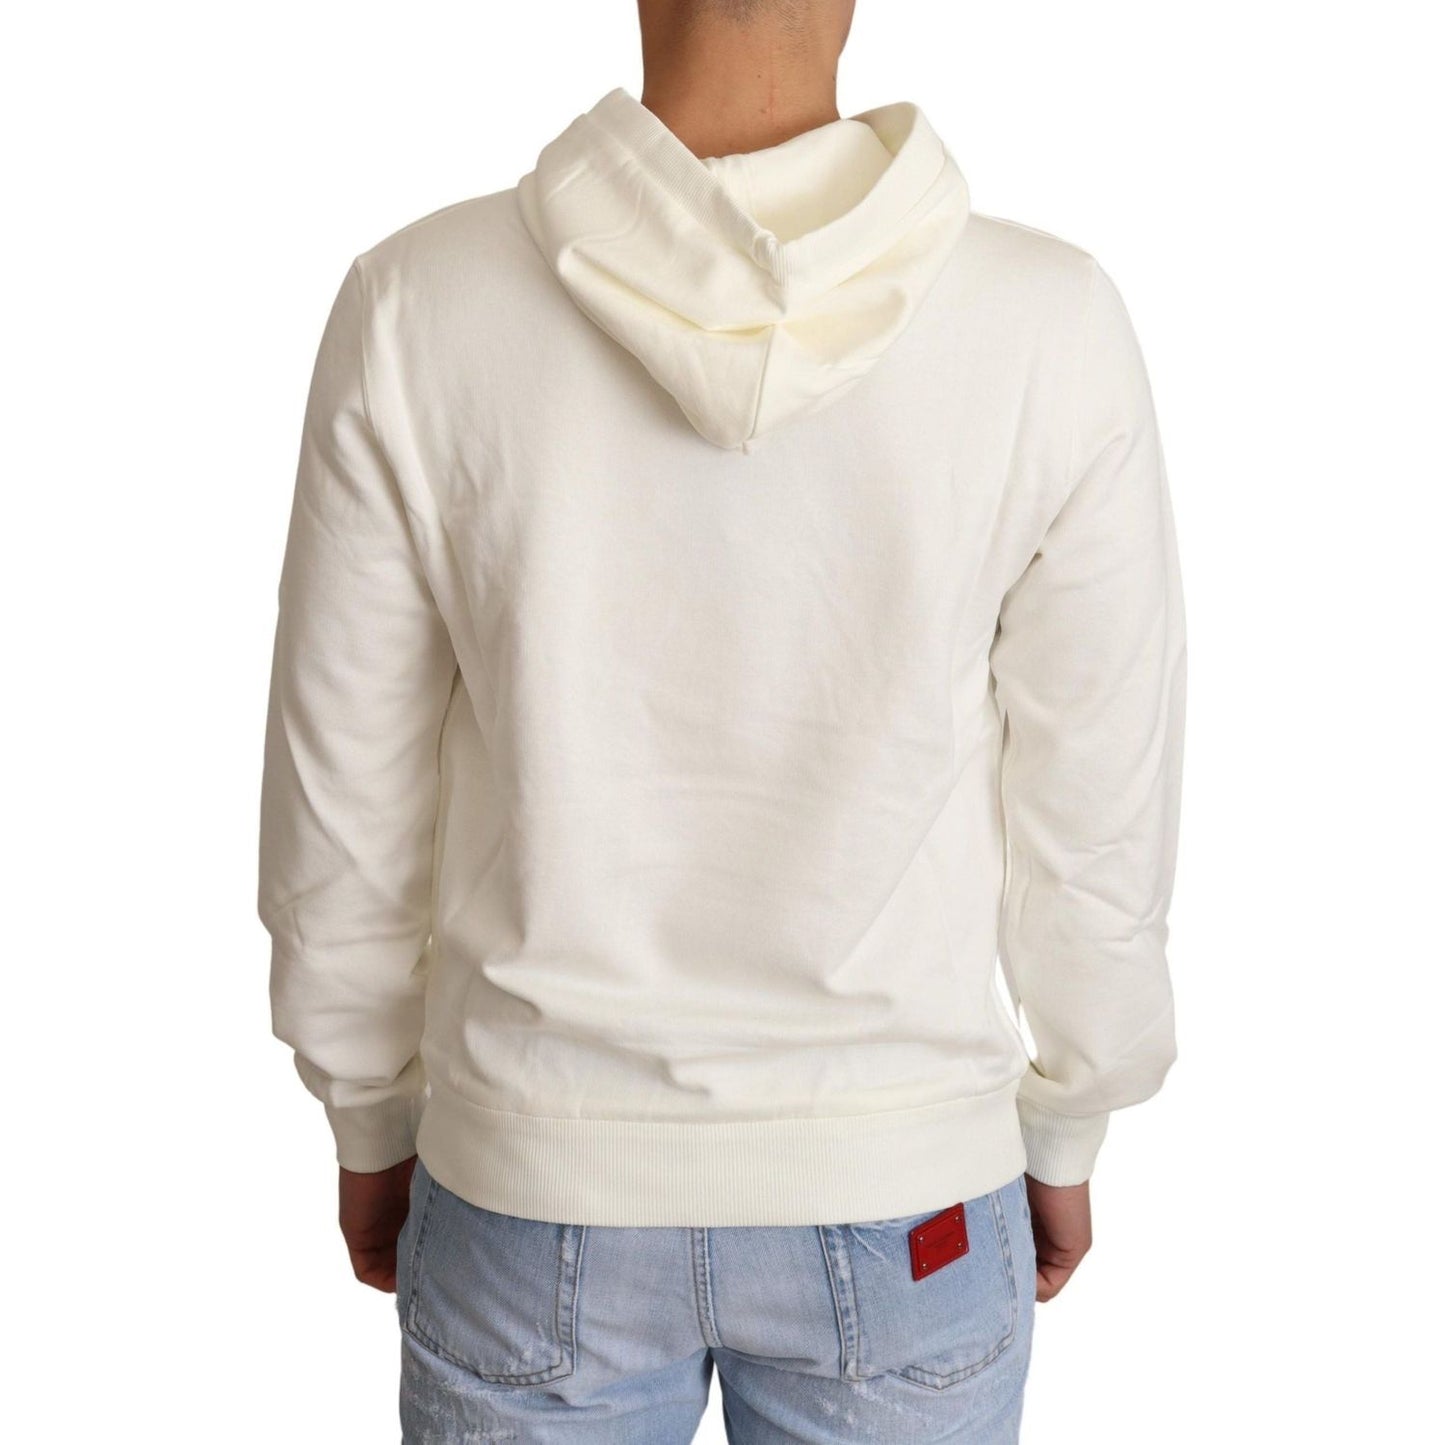 Dolce & Gabbana Regal King Motif Hooded Pullover Sweater white-king-ceasar-cotton-hooded-sweater